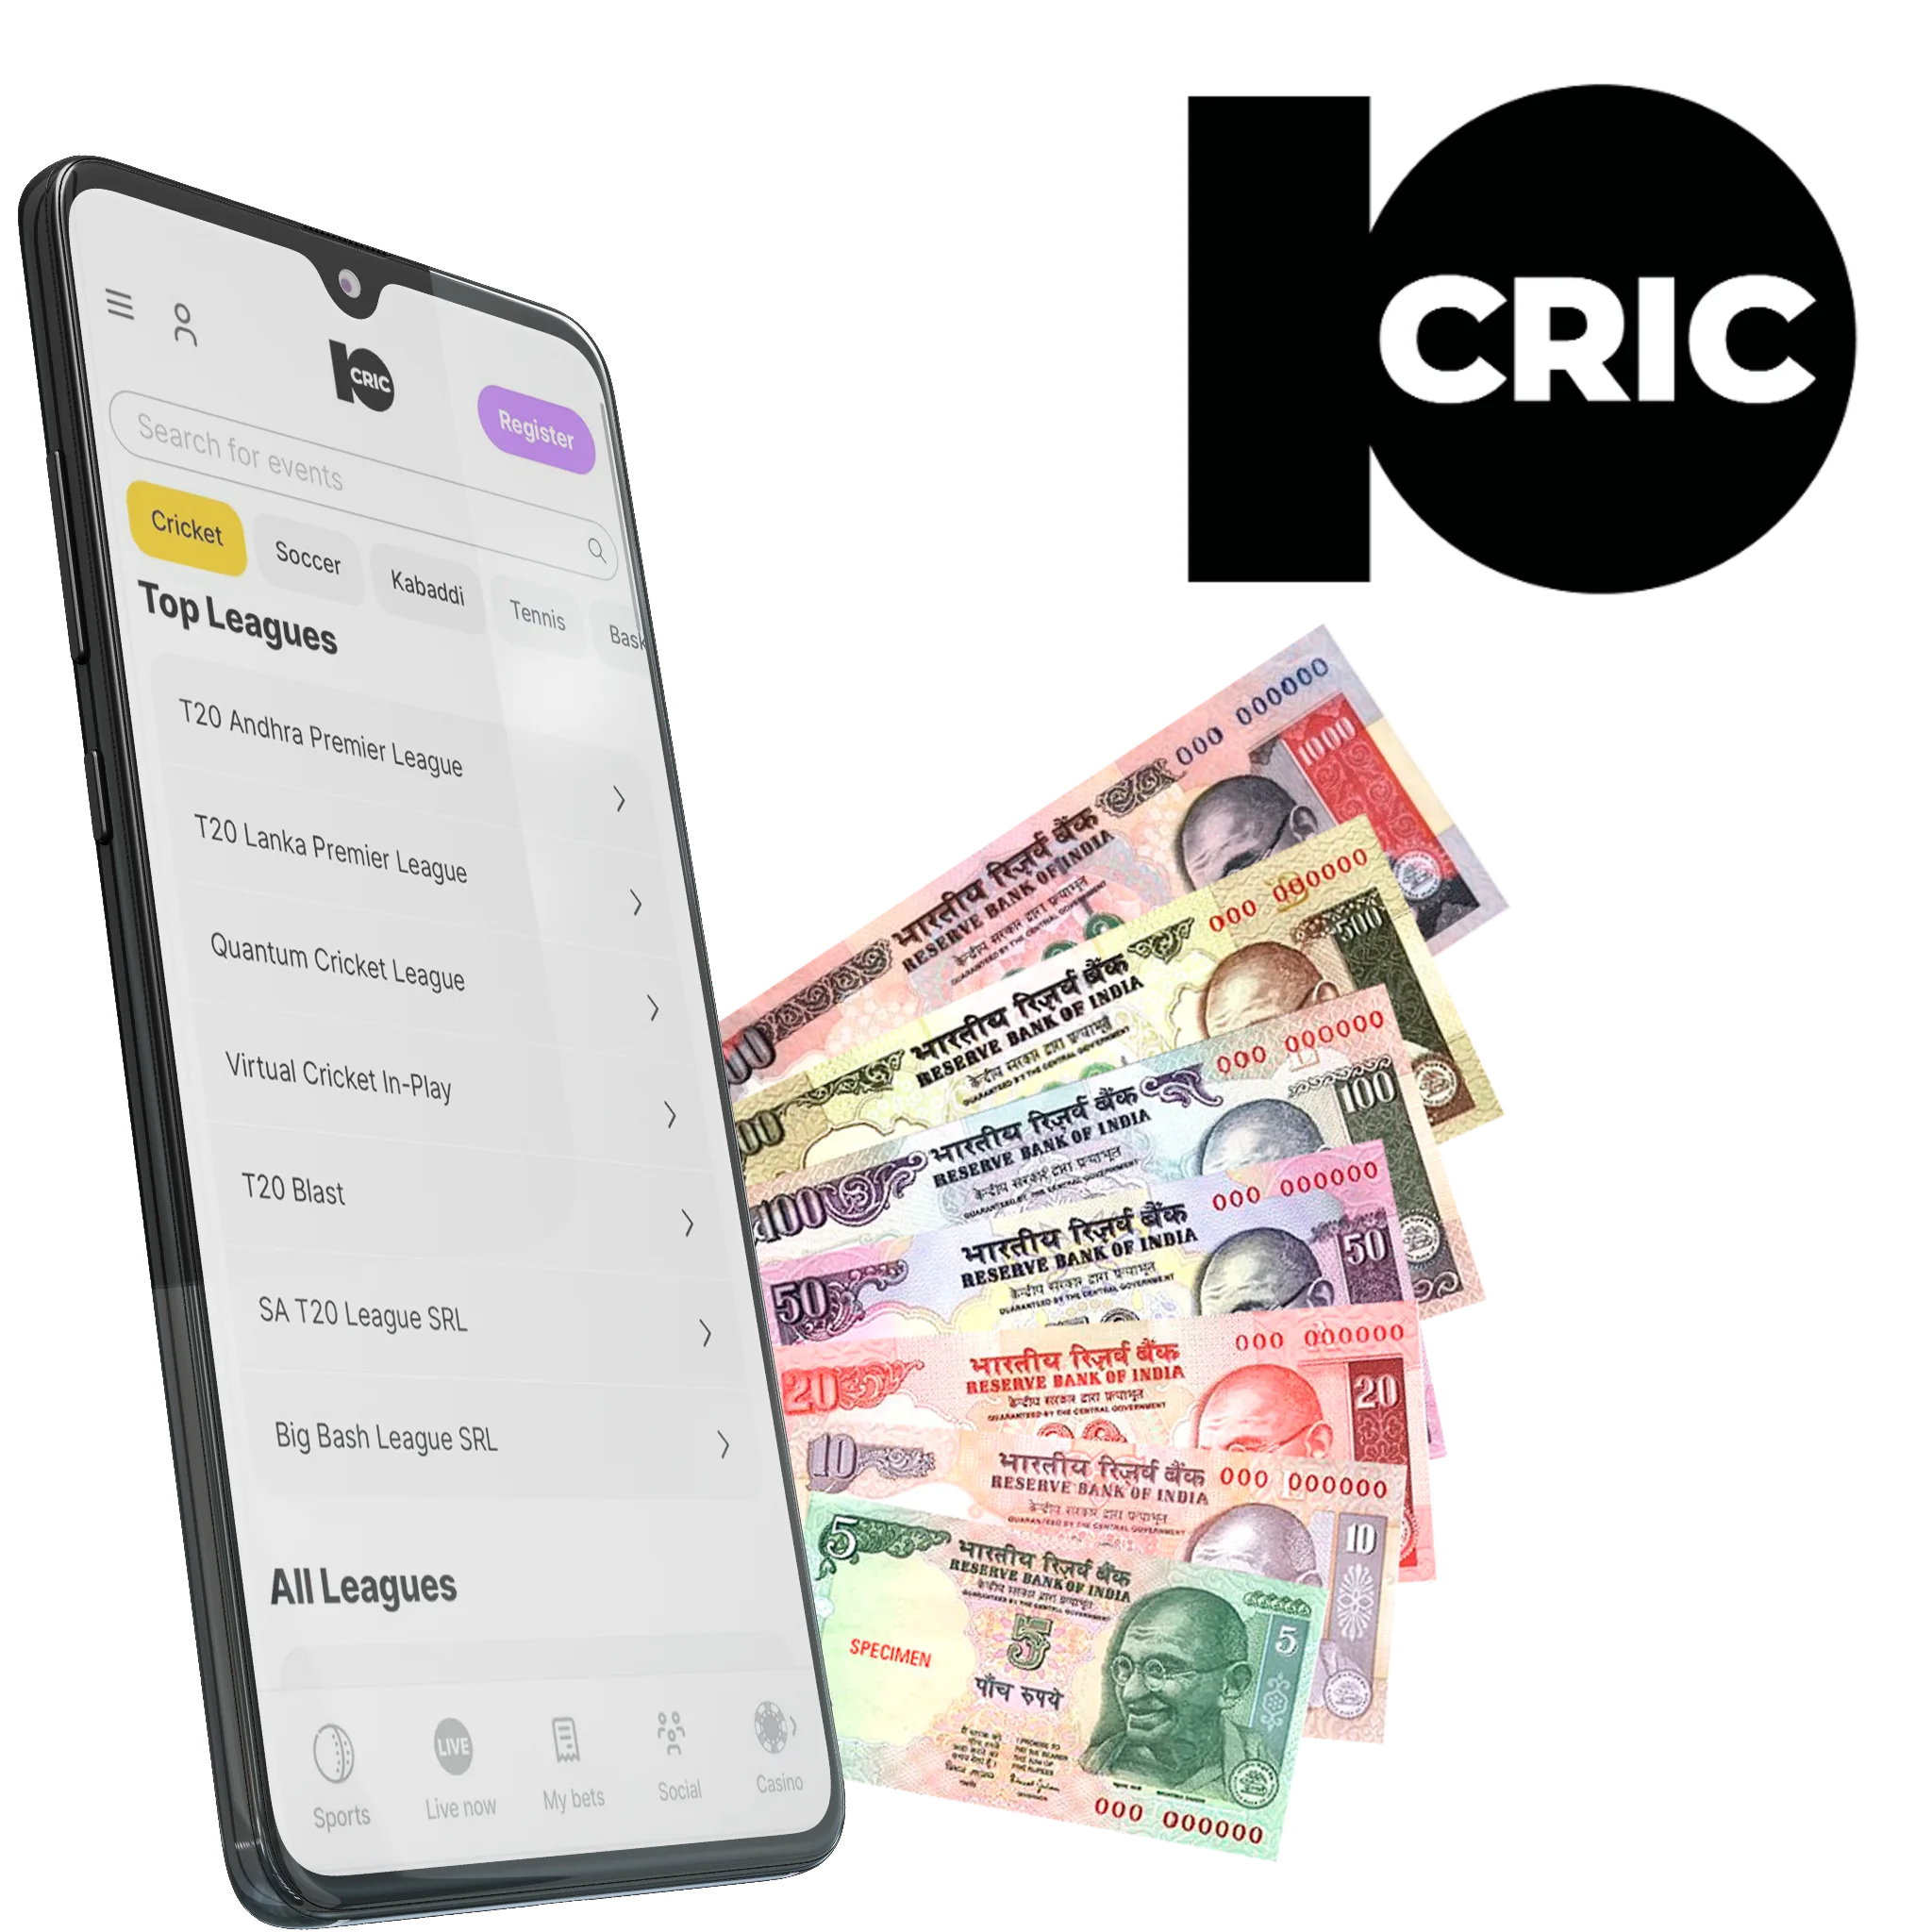 10cric App is designed especially for Indian players who value their security.